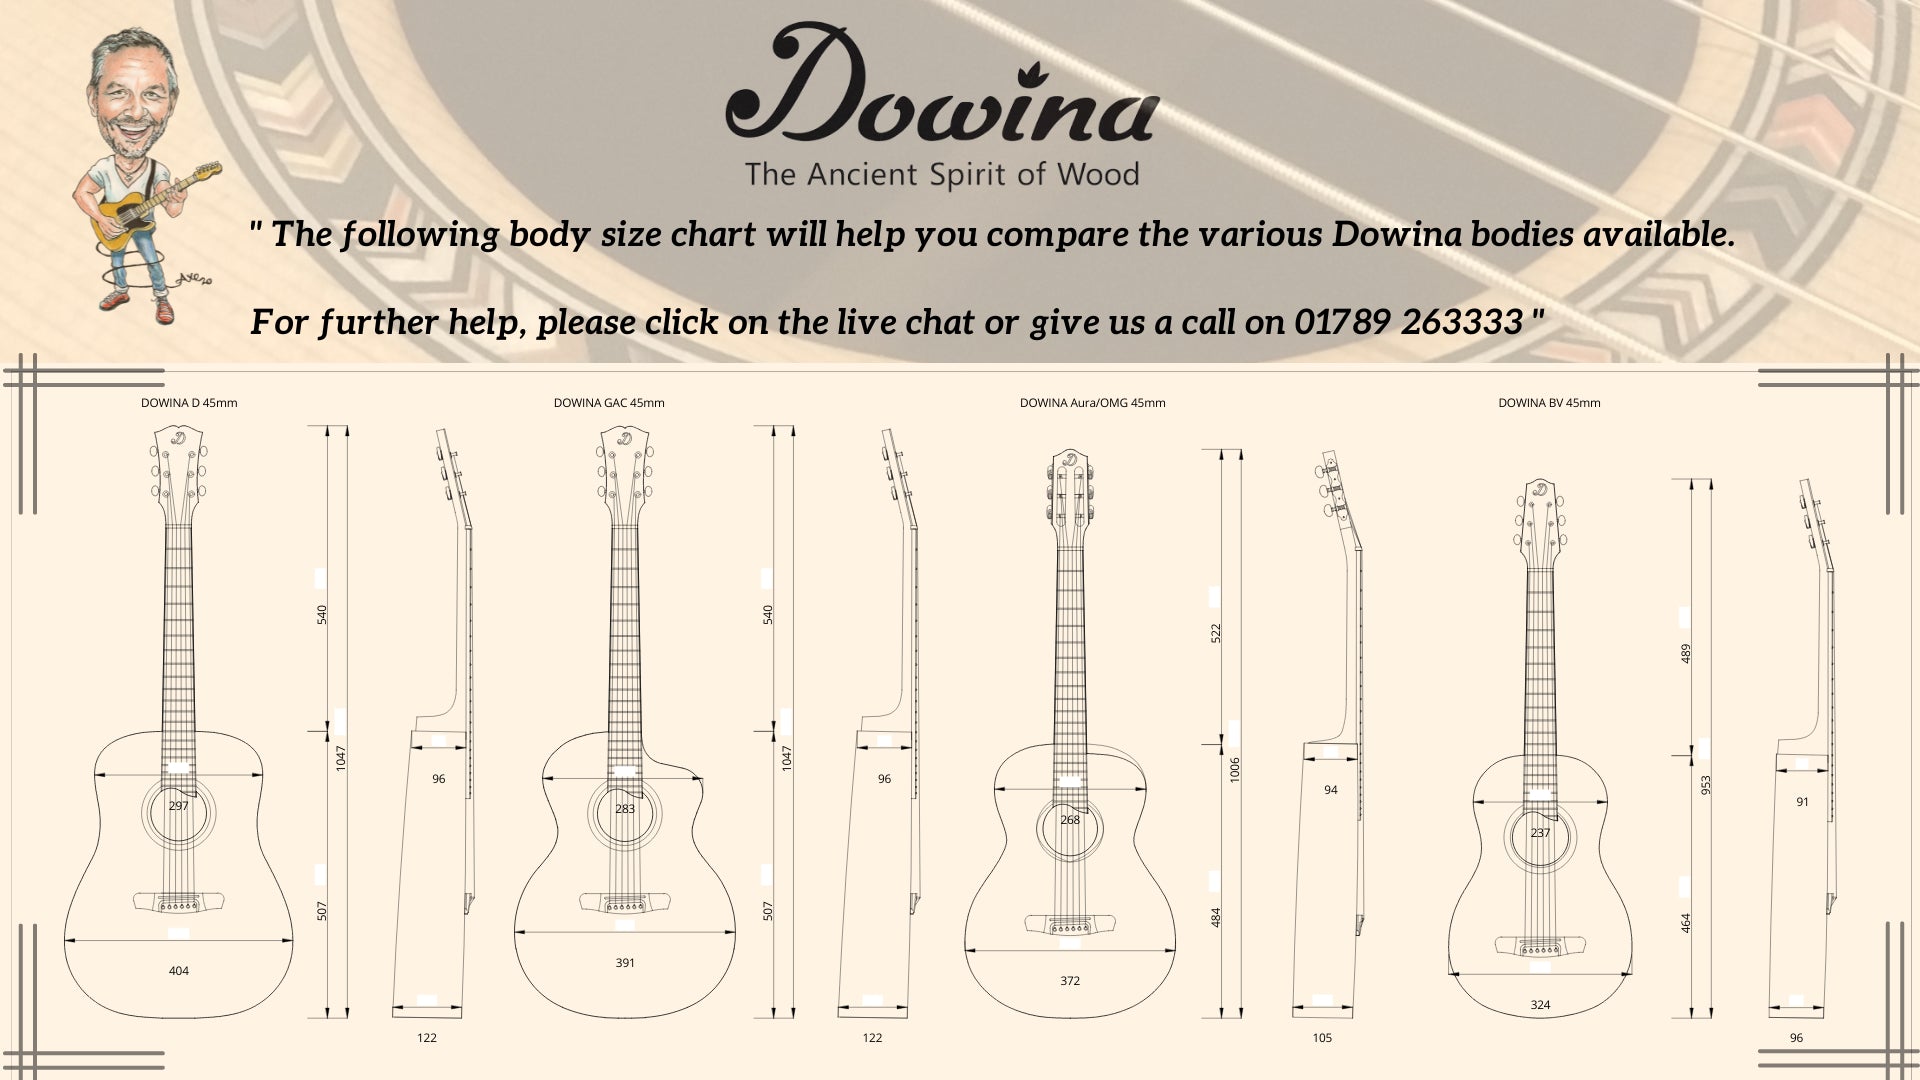 Dowina Pure Hyvibe GAC Left Handed, Acoustic Guitar for sale at Richards Guitars.